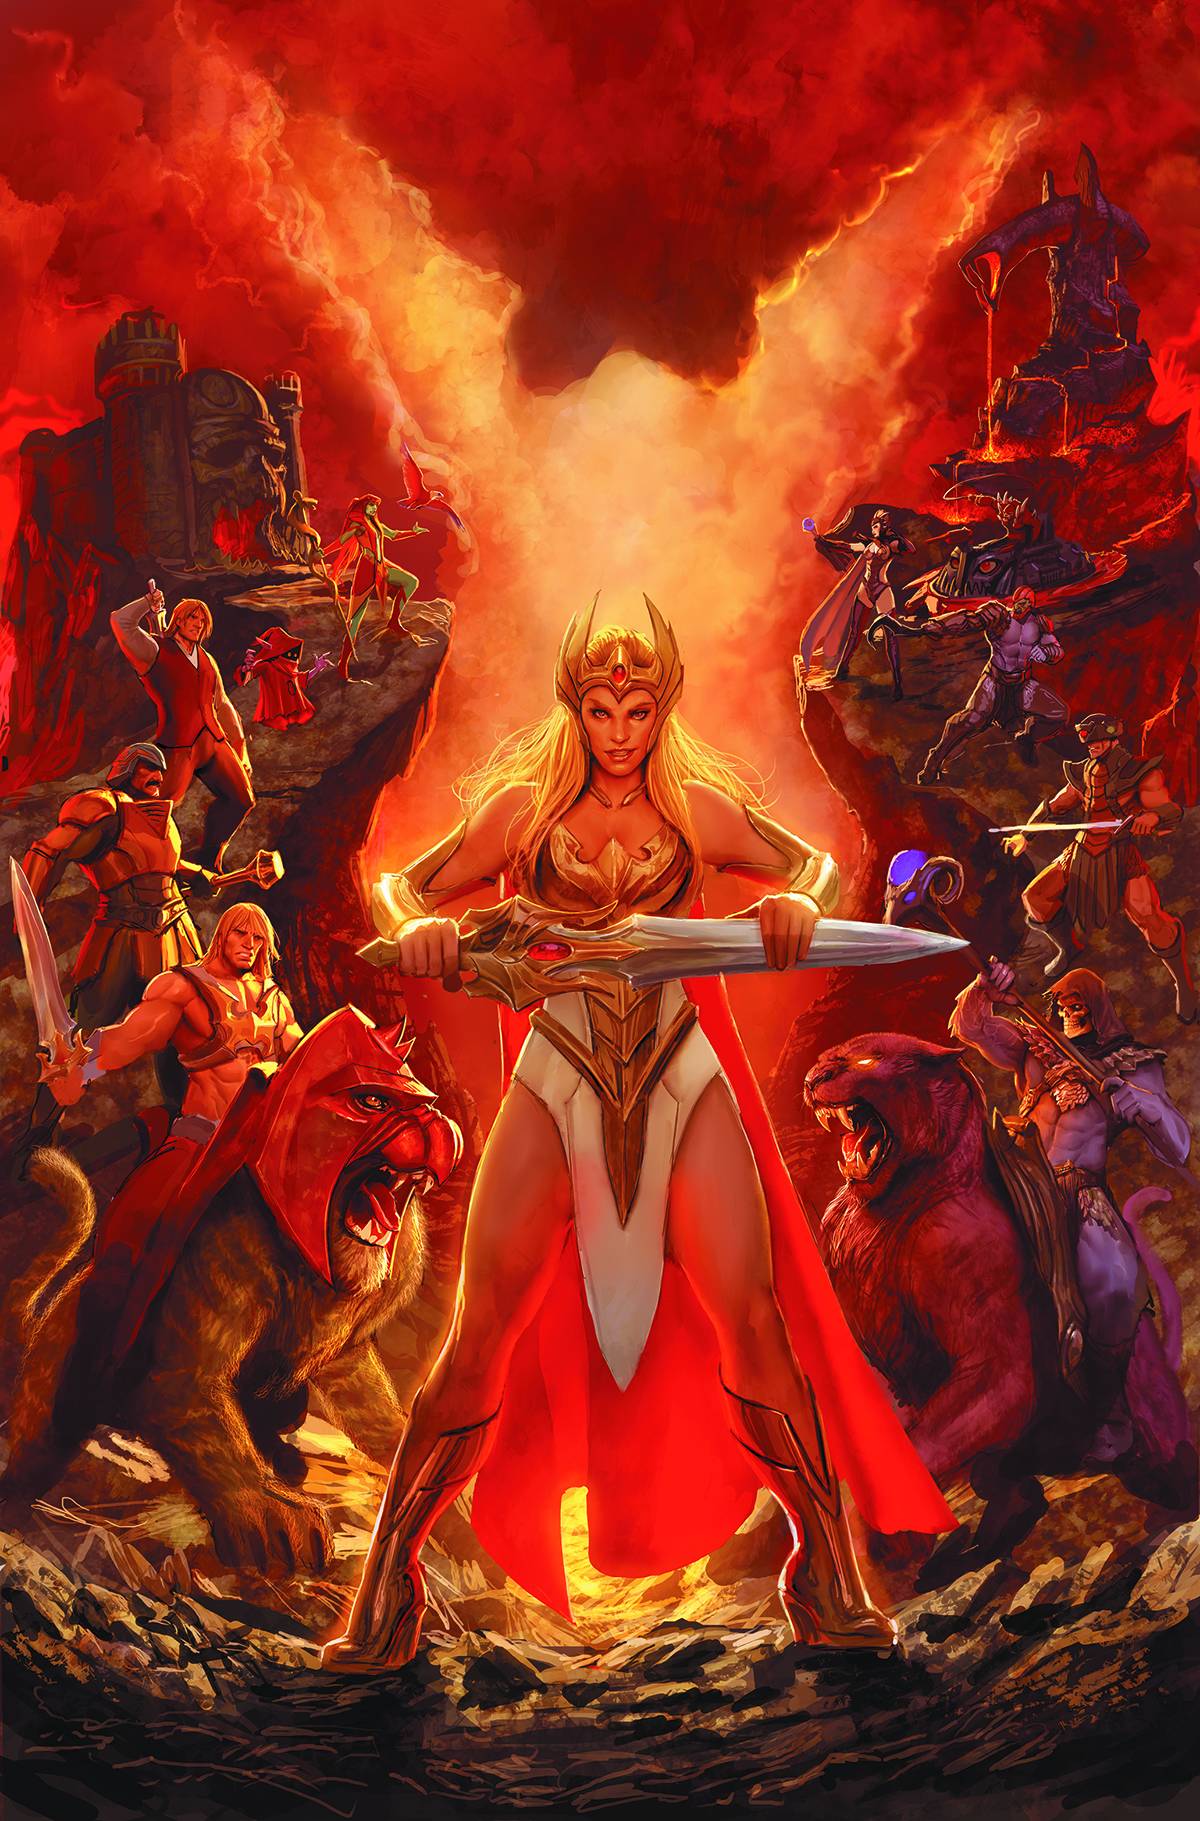 He-Man & The Masters of the Universe Graphic Novel Volume 5